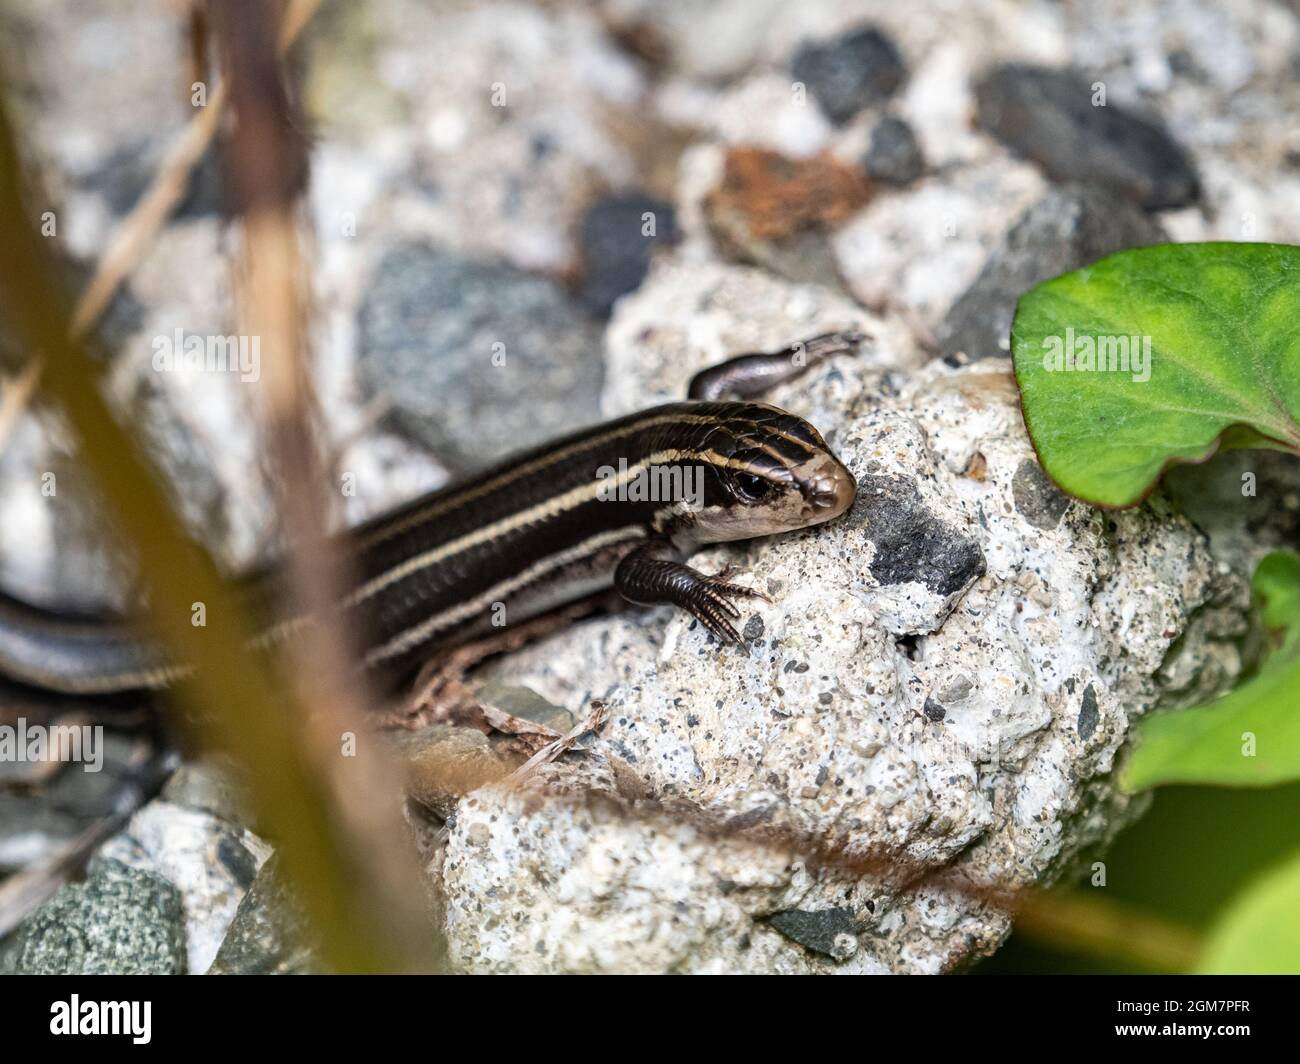 Scenic view of a Five-lined skink hiding in the broken concrete rocks along a walking path Stock Photo